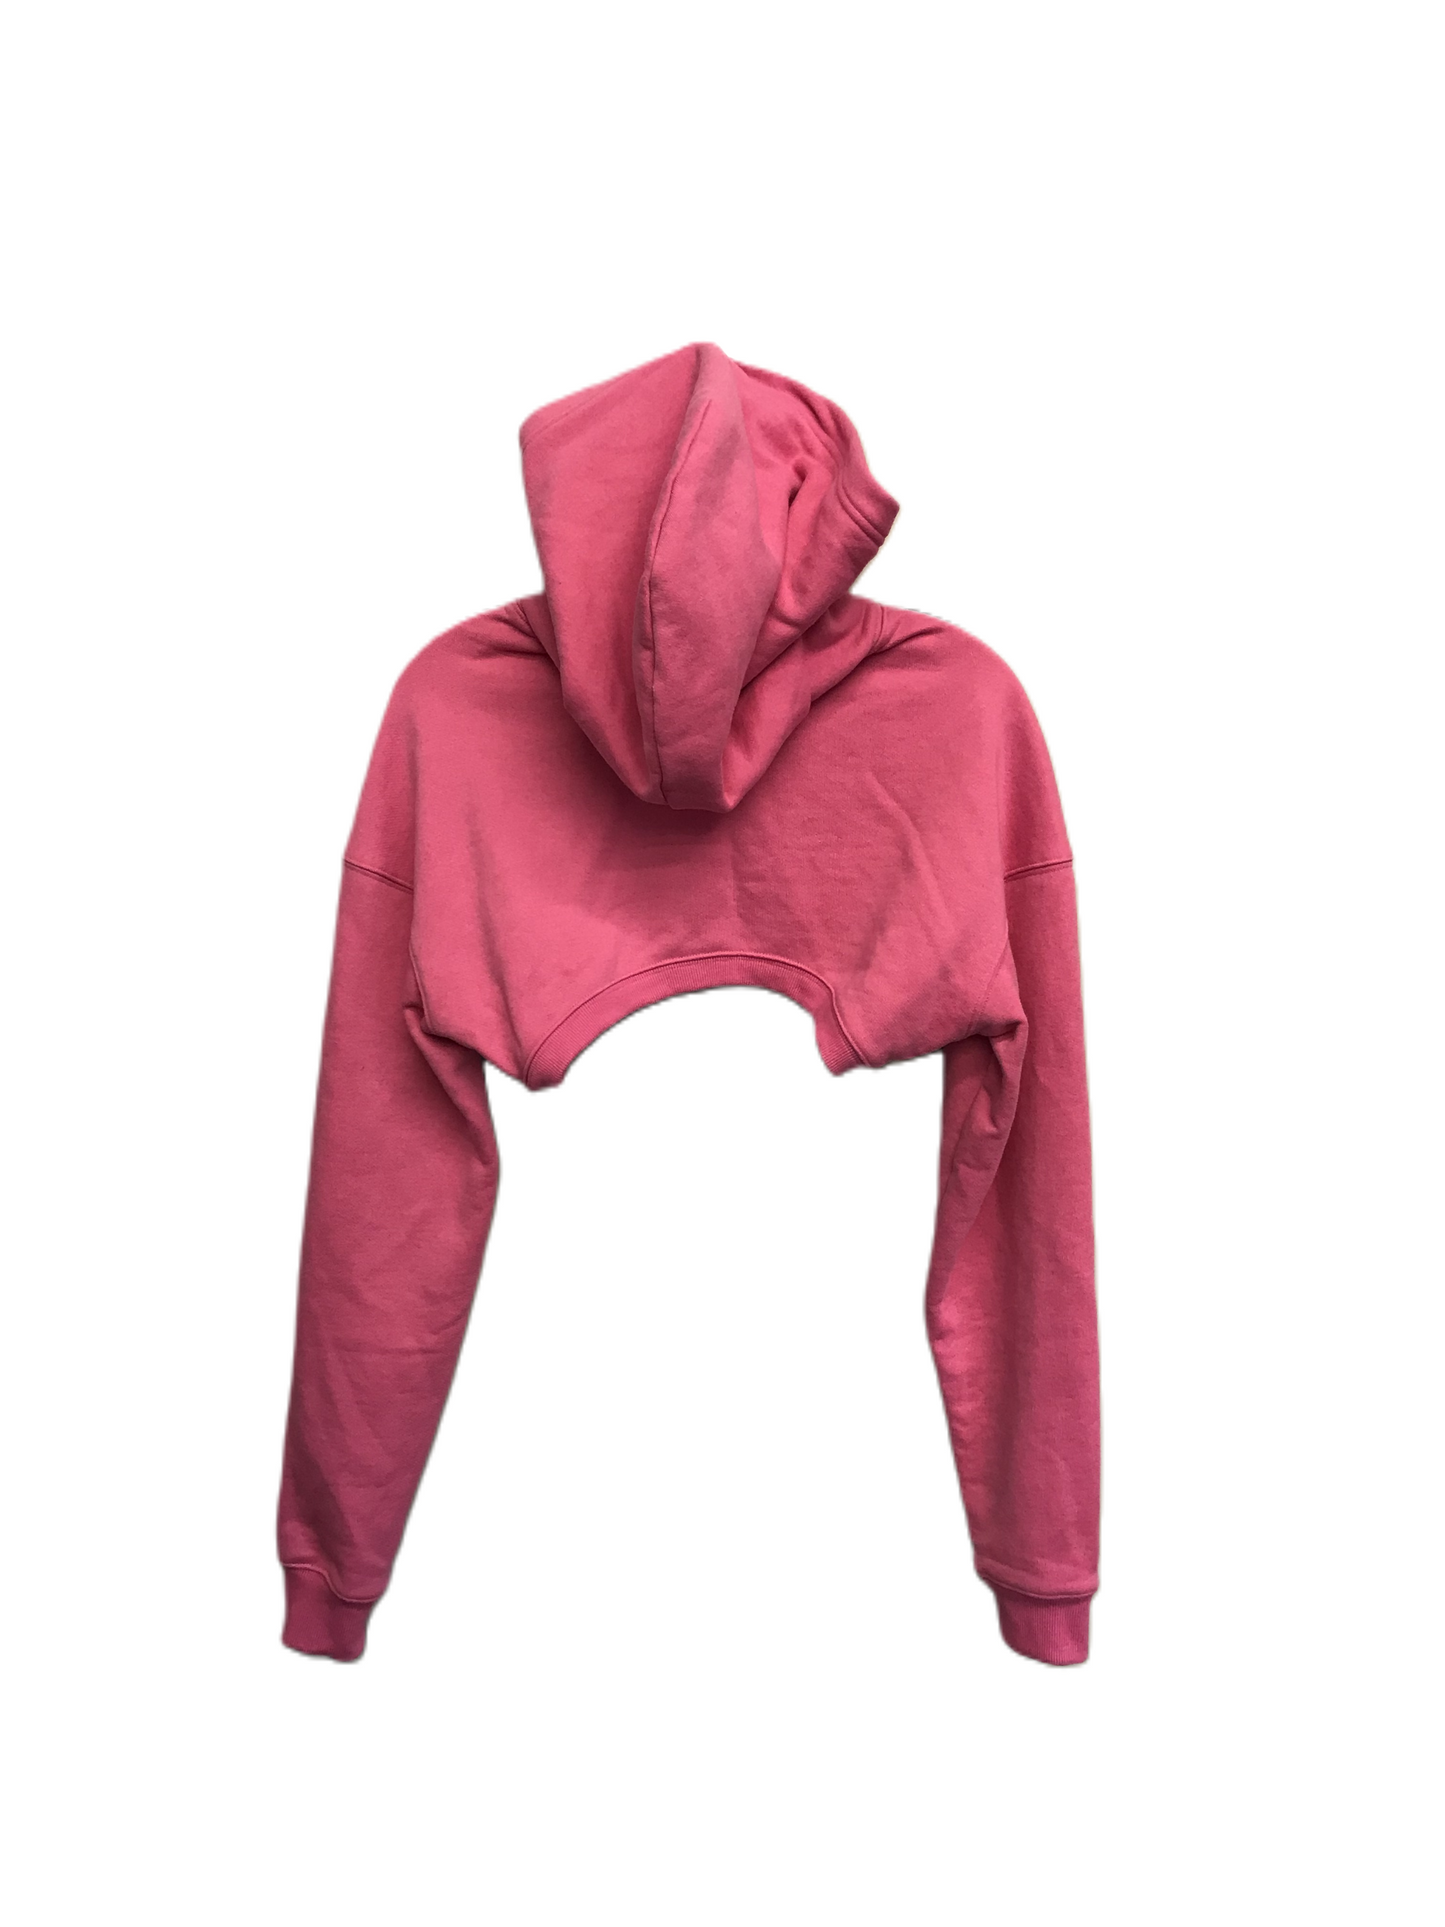 Pink Athletic Sweatshirt Hoodie By Alo, Size: Xs